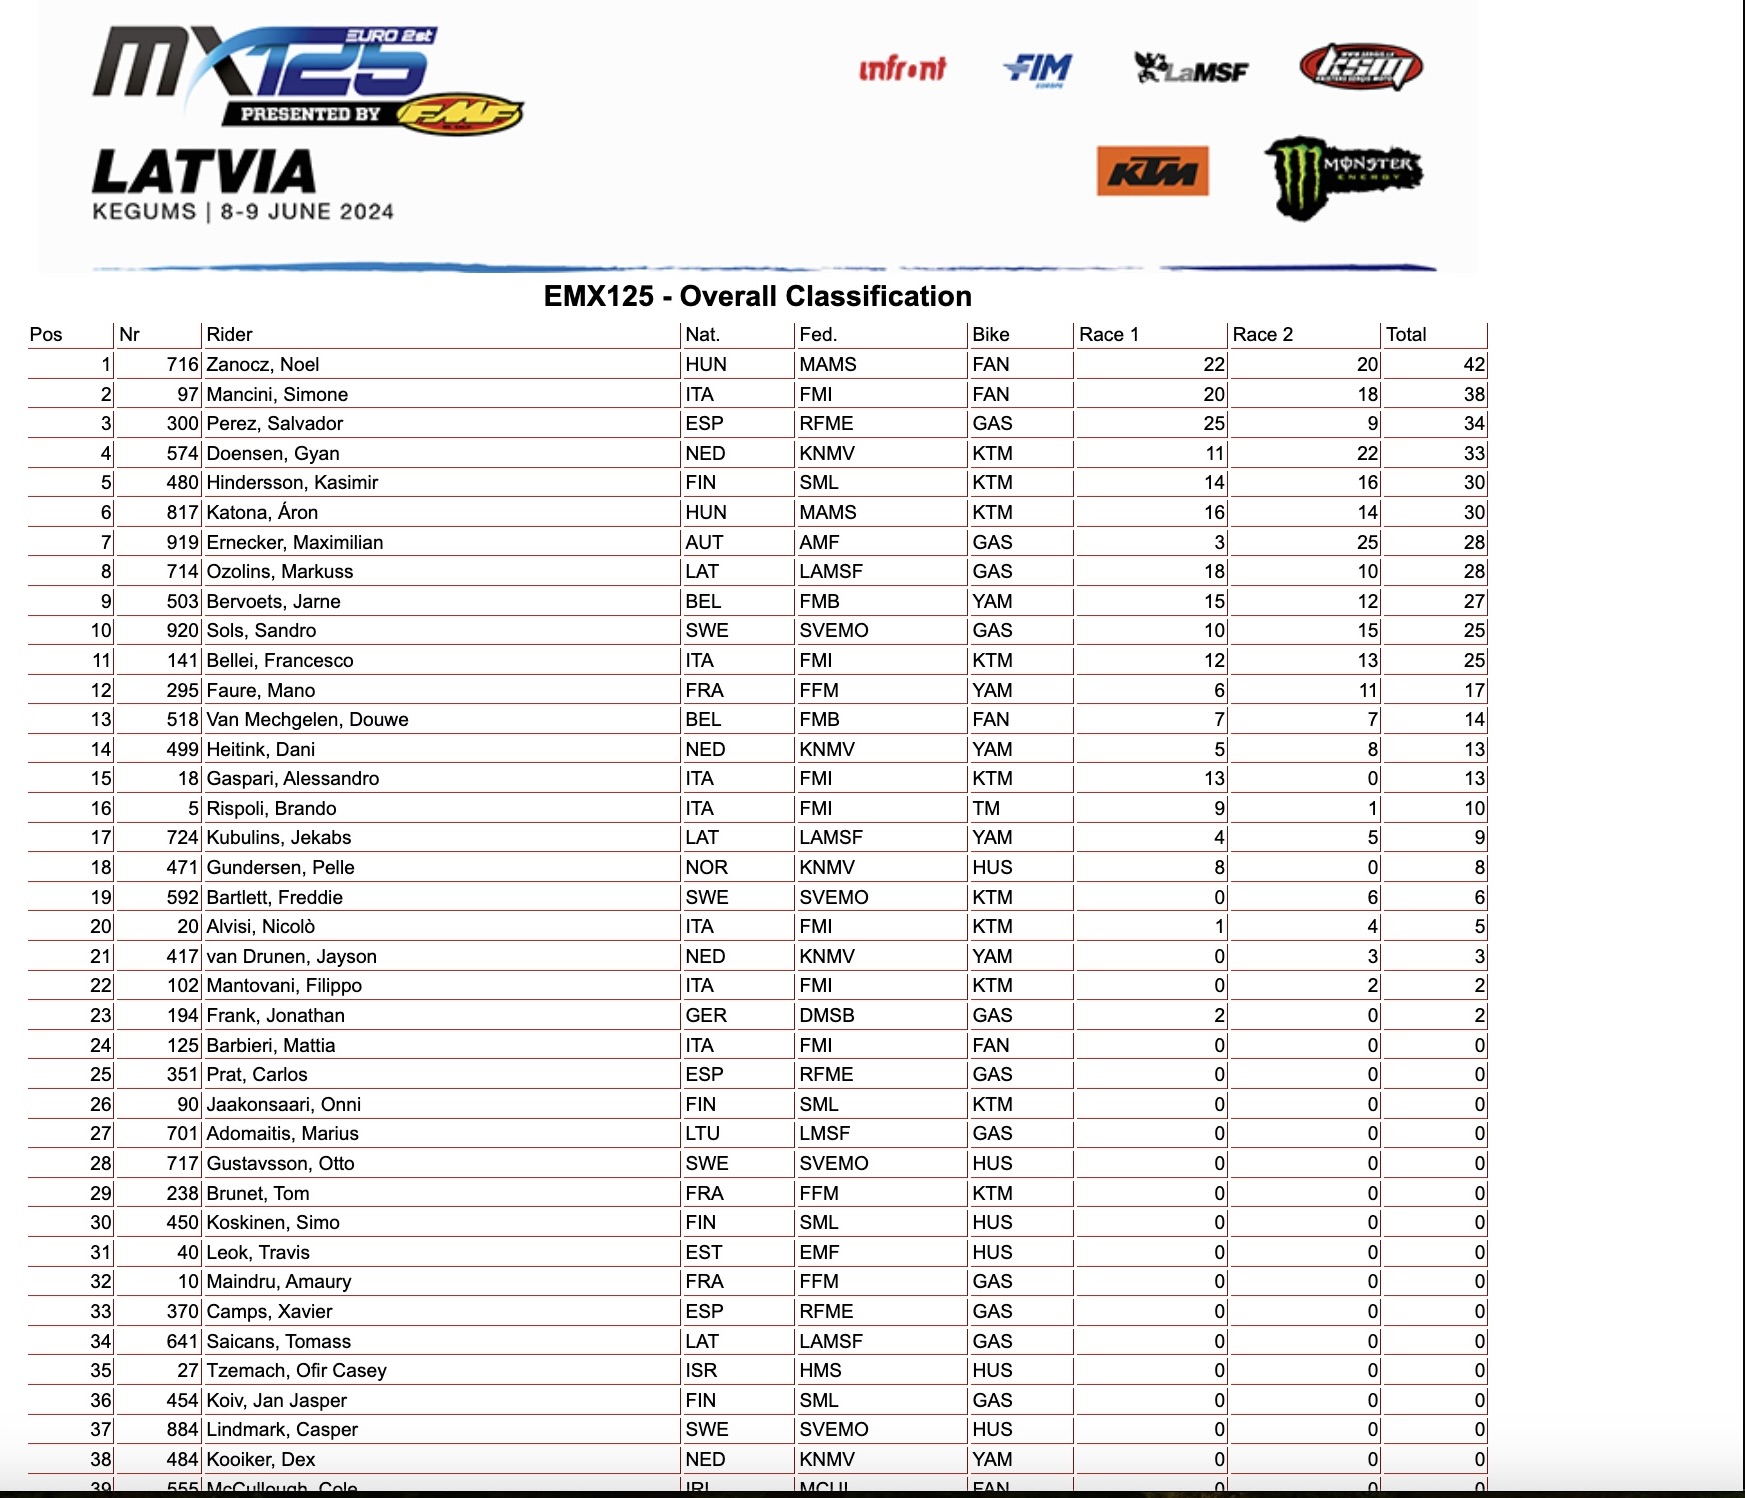 EMX125 GP Lettonia overall classification